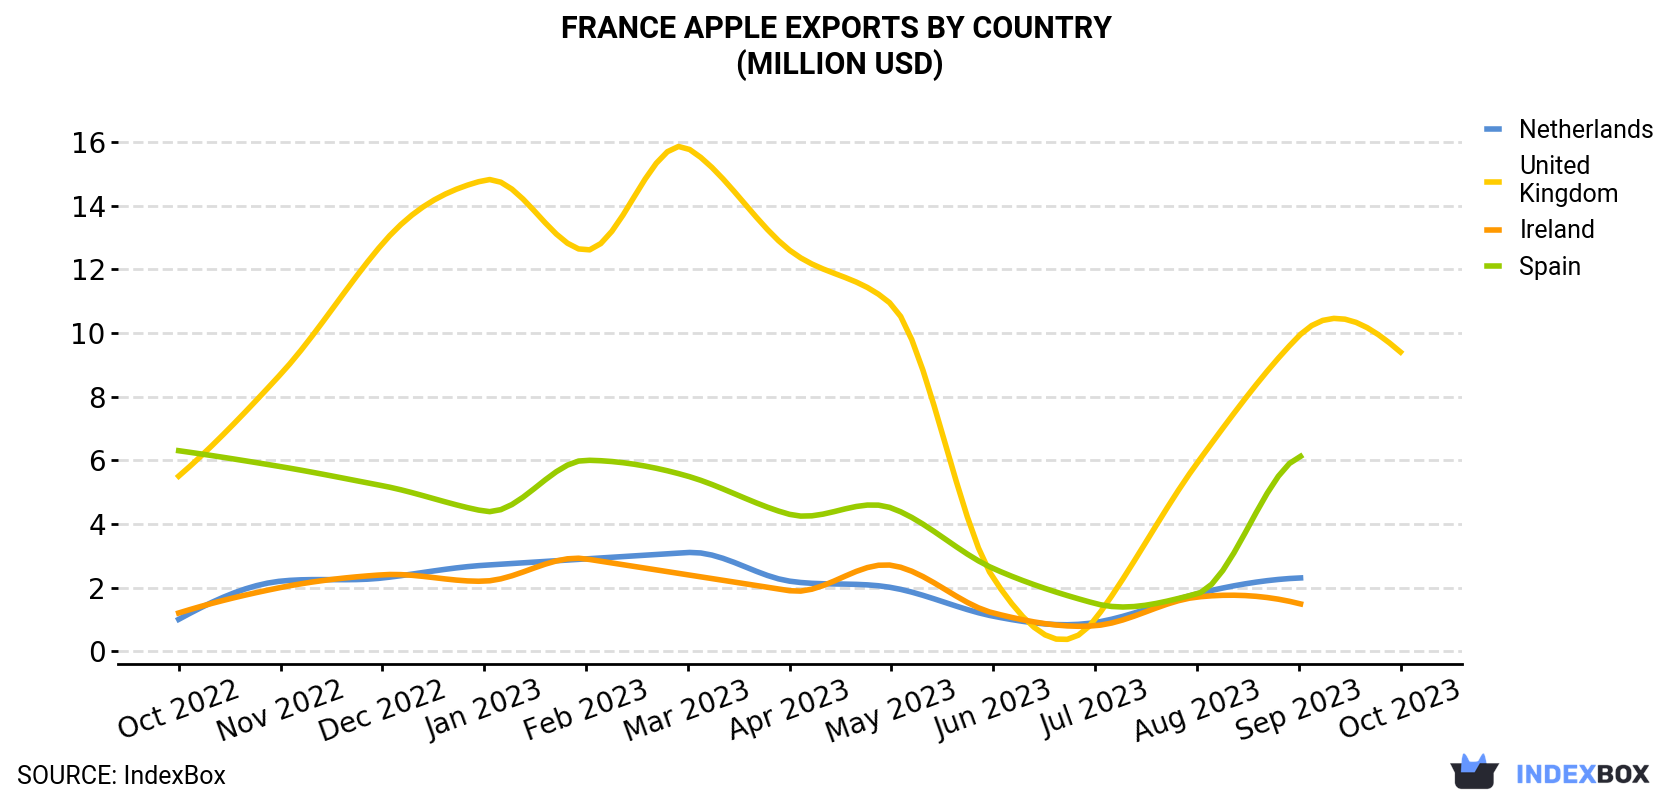 France Apple Exports By Country (Million USD)